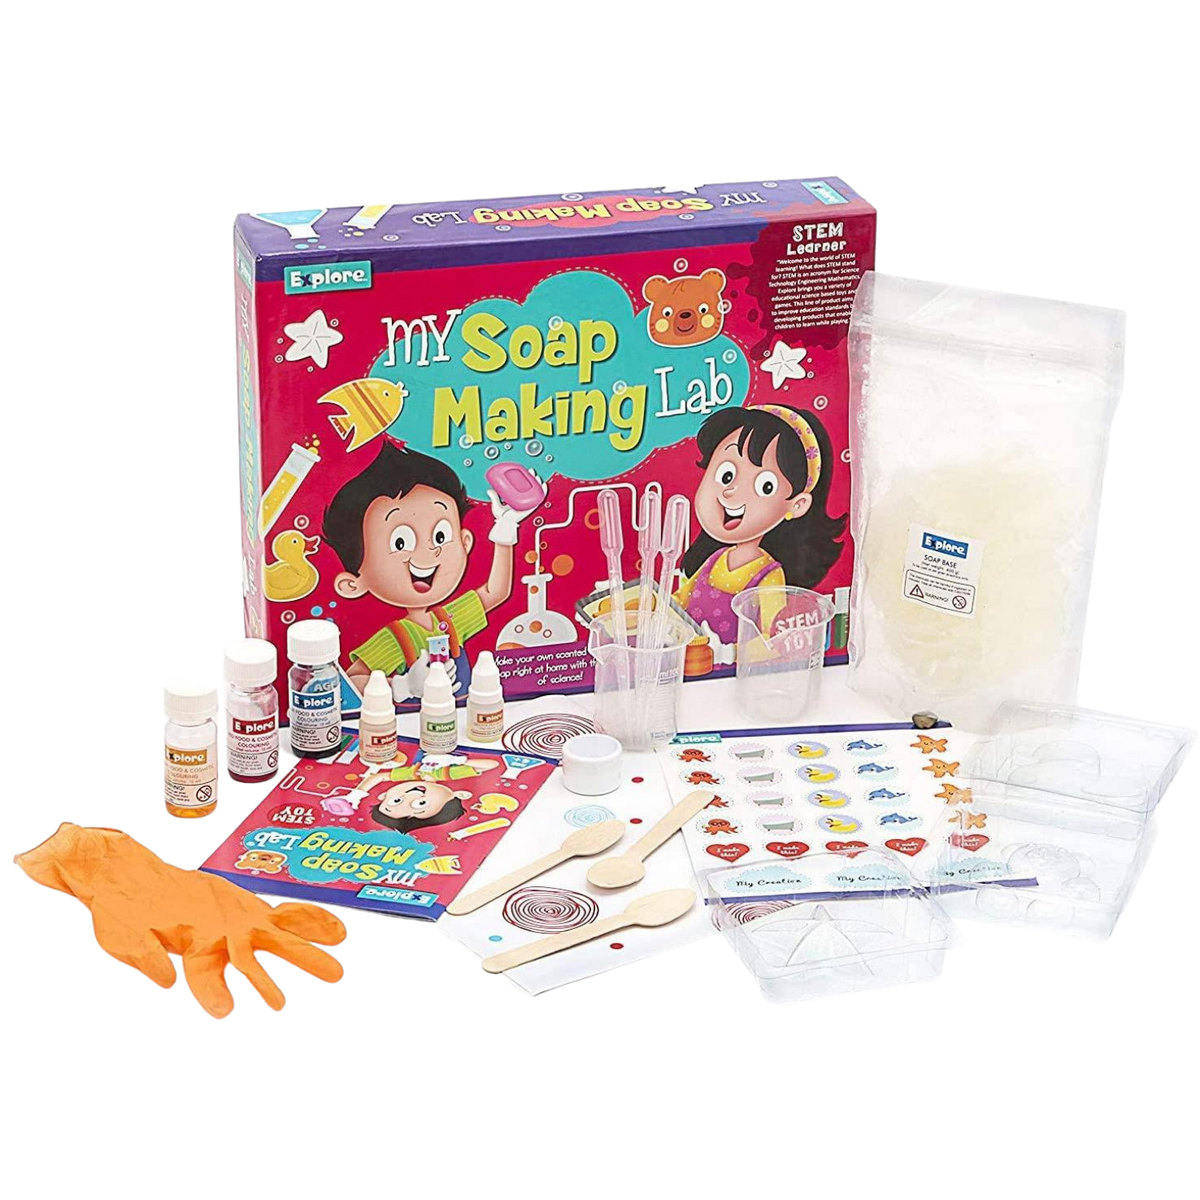 B Me Beginner Soap Making Craft Kits for Kids Girls Ages 6+ | Make 15+ Soap  Shapes with 5 Different Scents | Make Your Own Soap Science Kits Toys